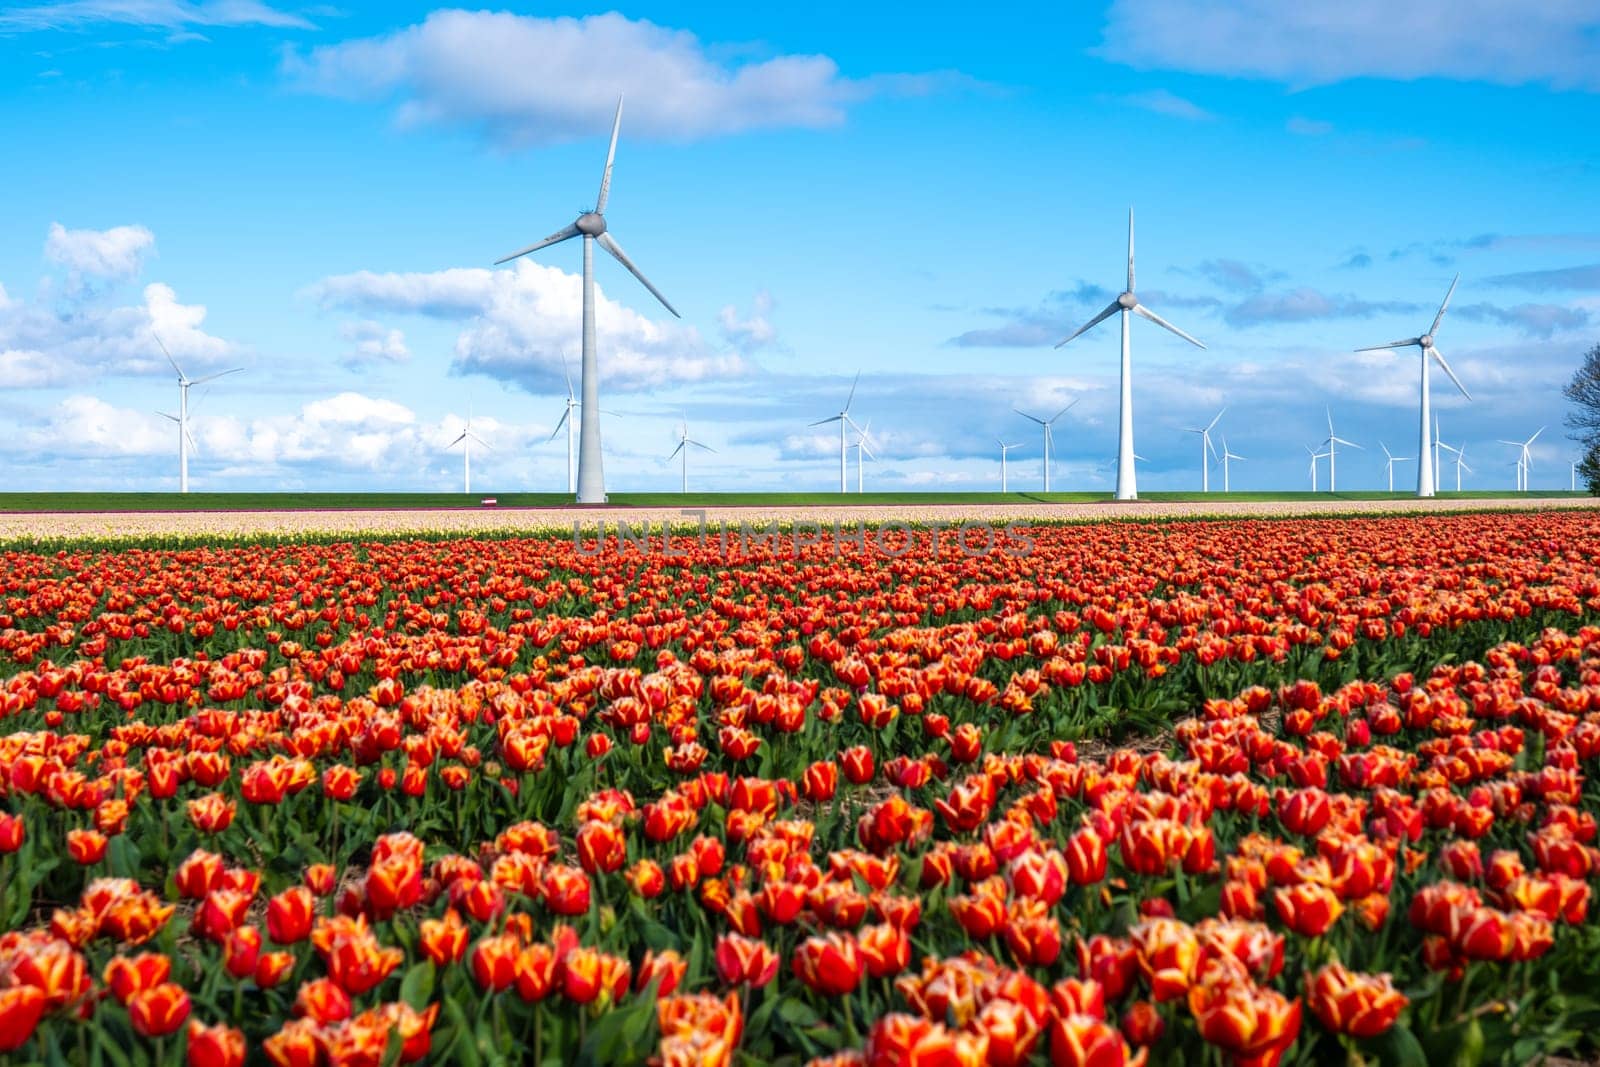 A vast field of red and yellow tulips in full bloom swaying gently in the wind, with iconic windmill turbines standing tall in the background by fokkebok